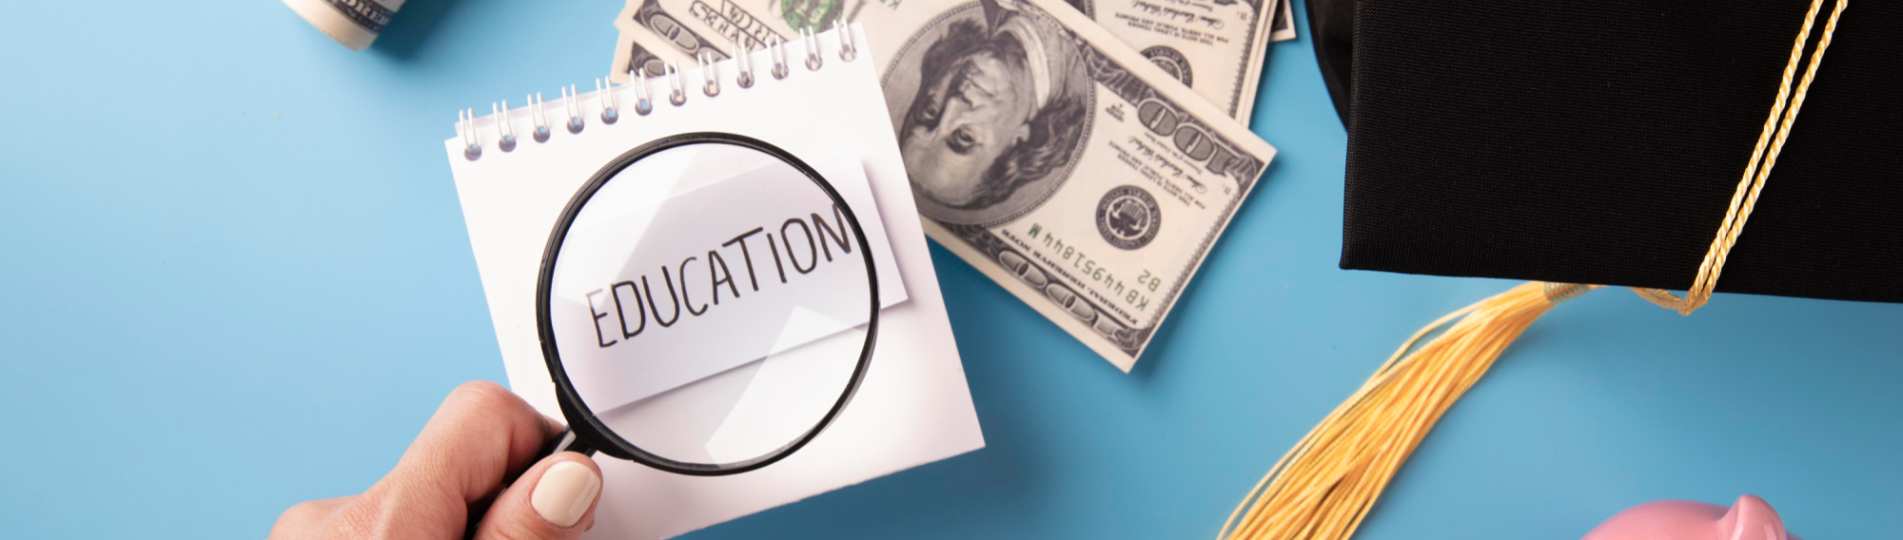 5 tips for universities to stop corruption in education